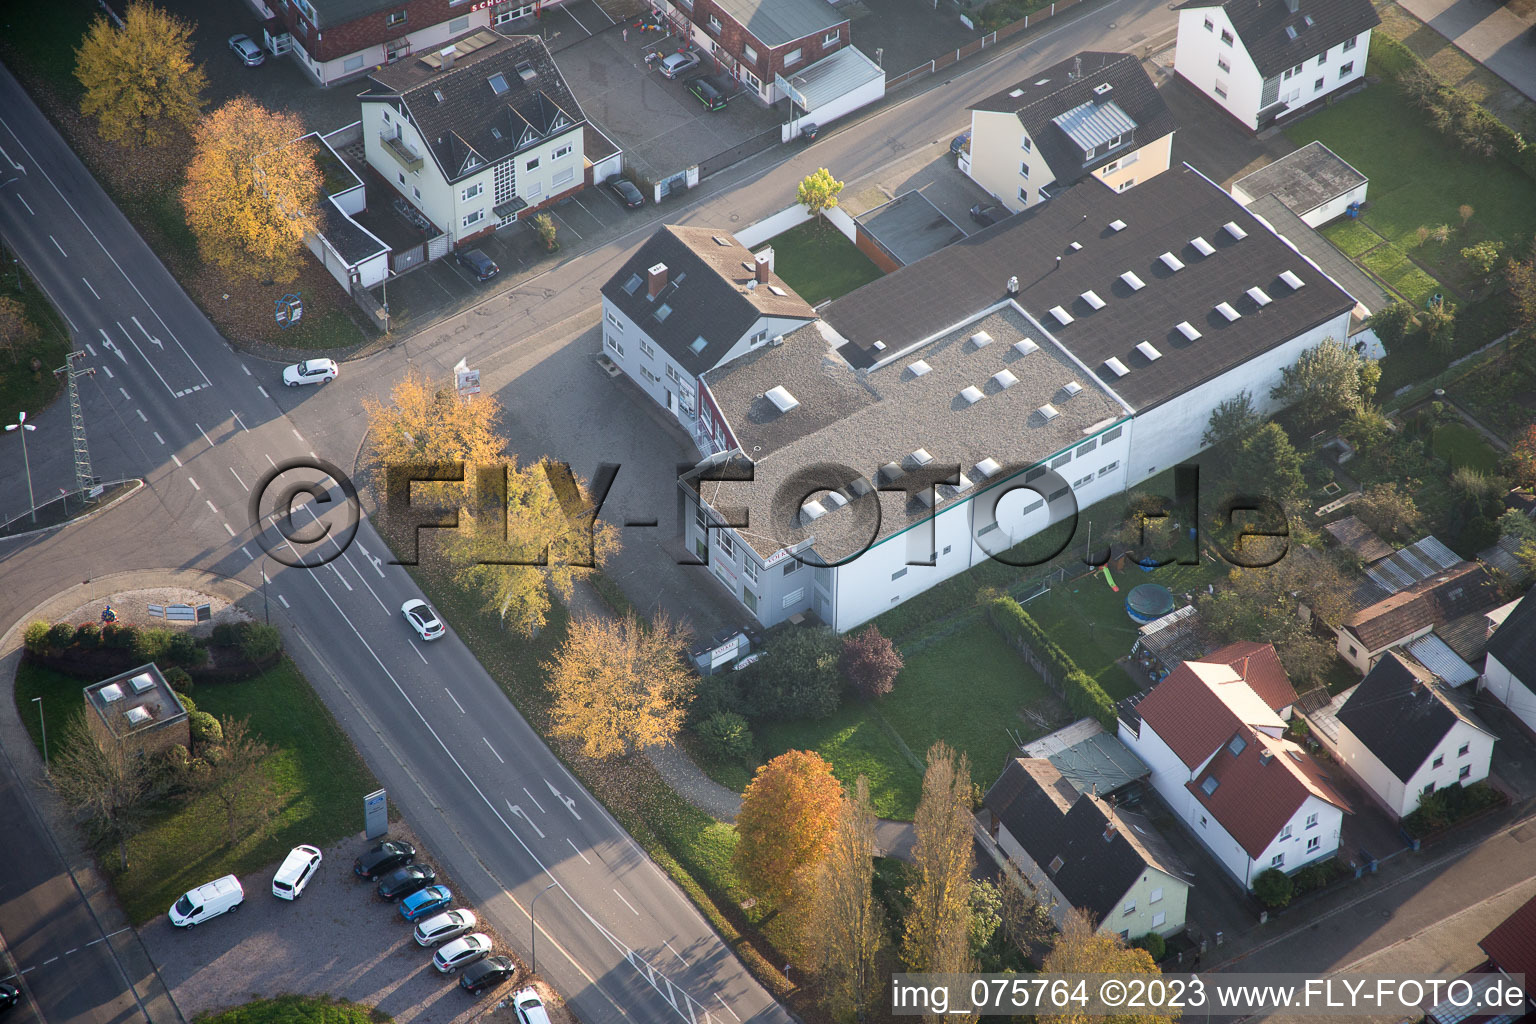 Aerial view of Folk in Kandel in the state Rhineland-Palatinate, Germany